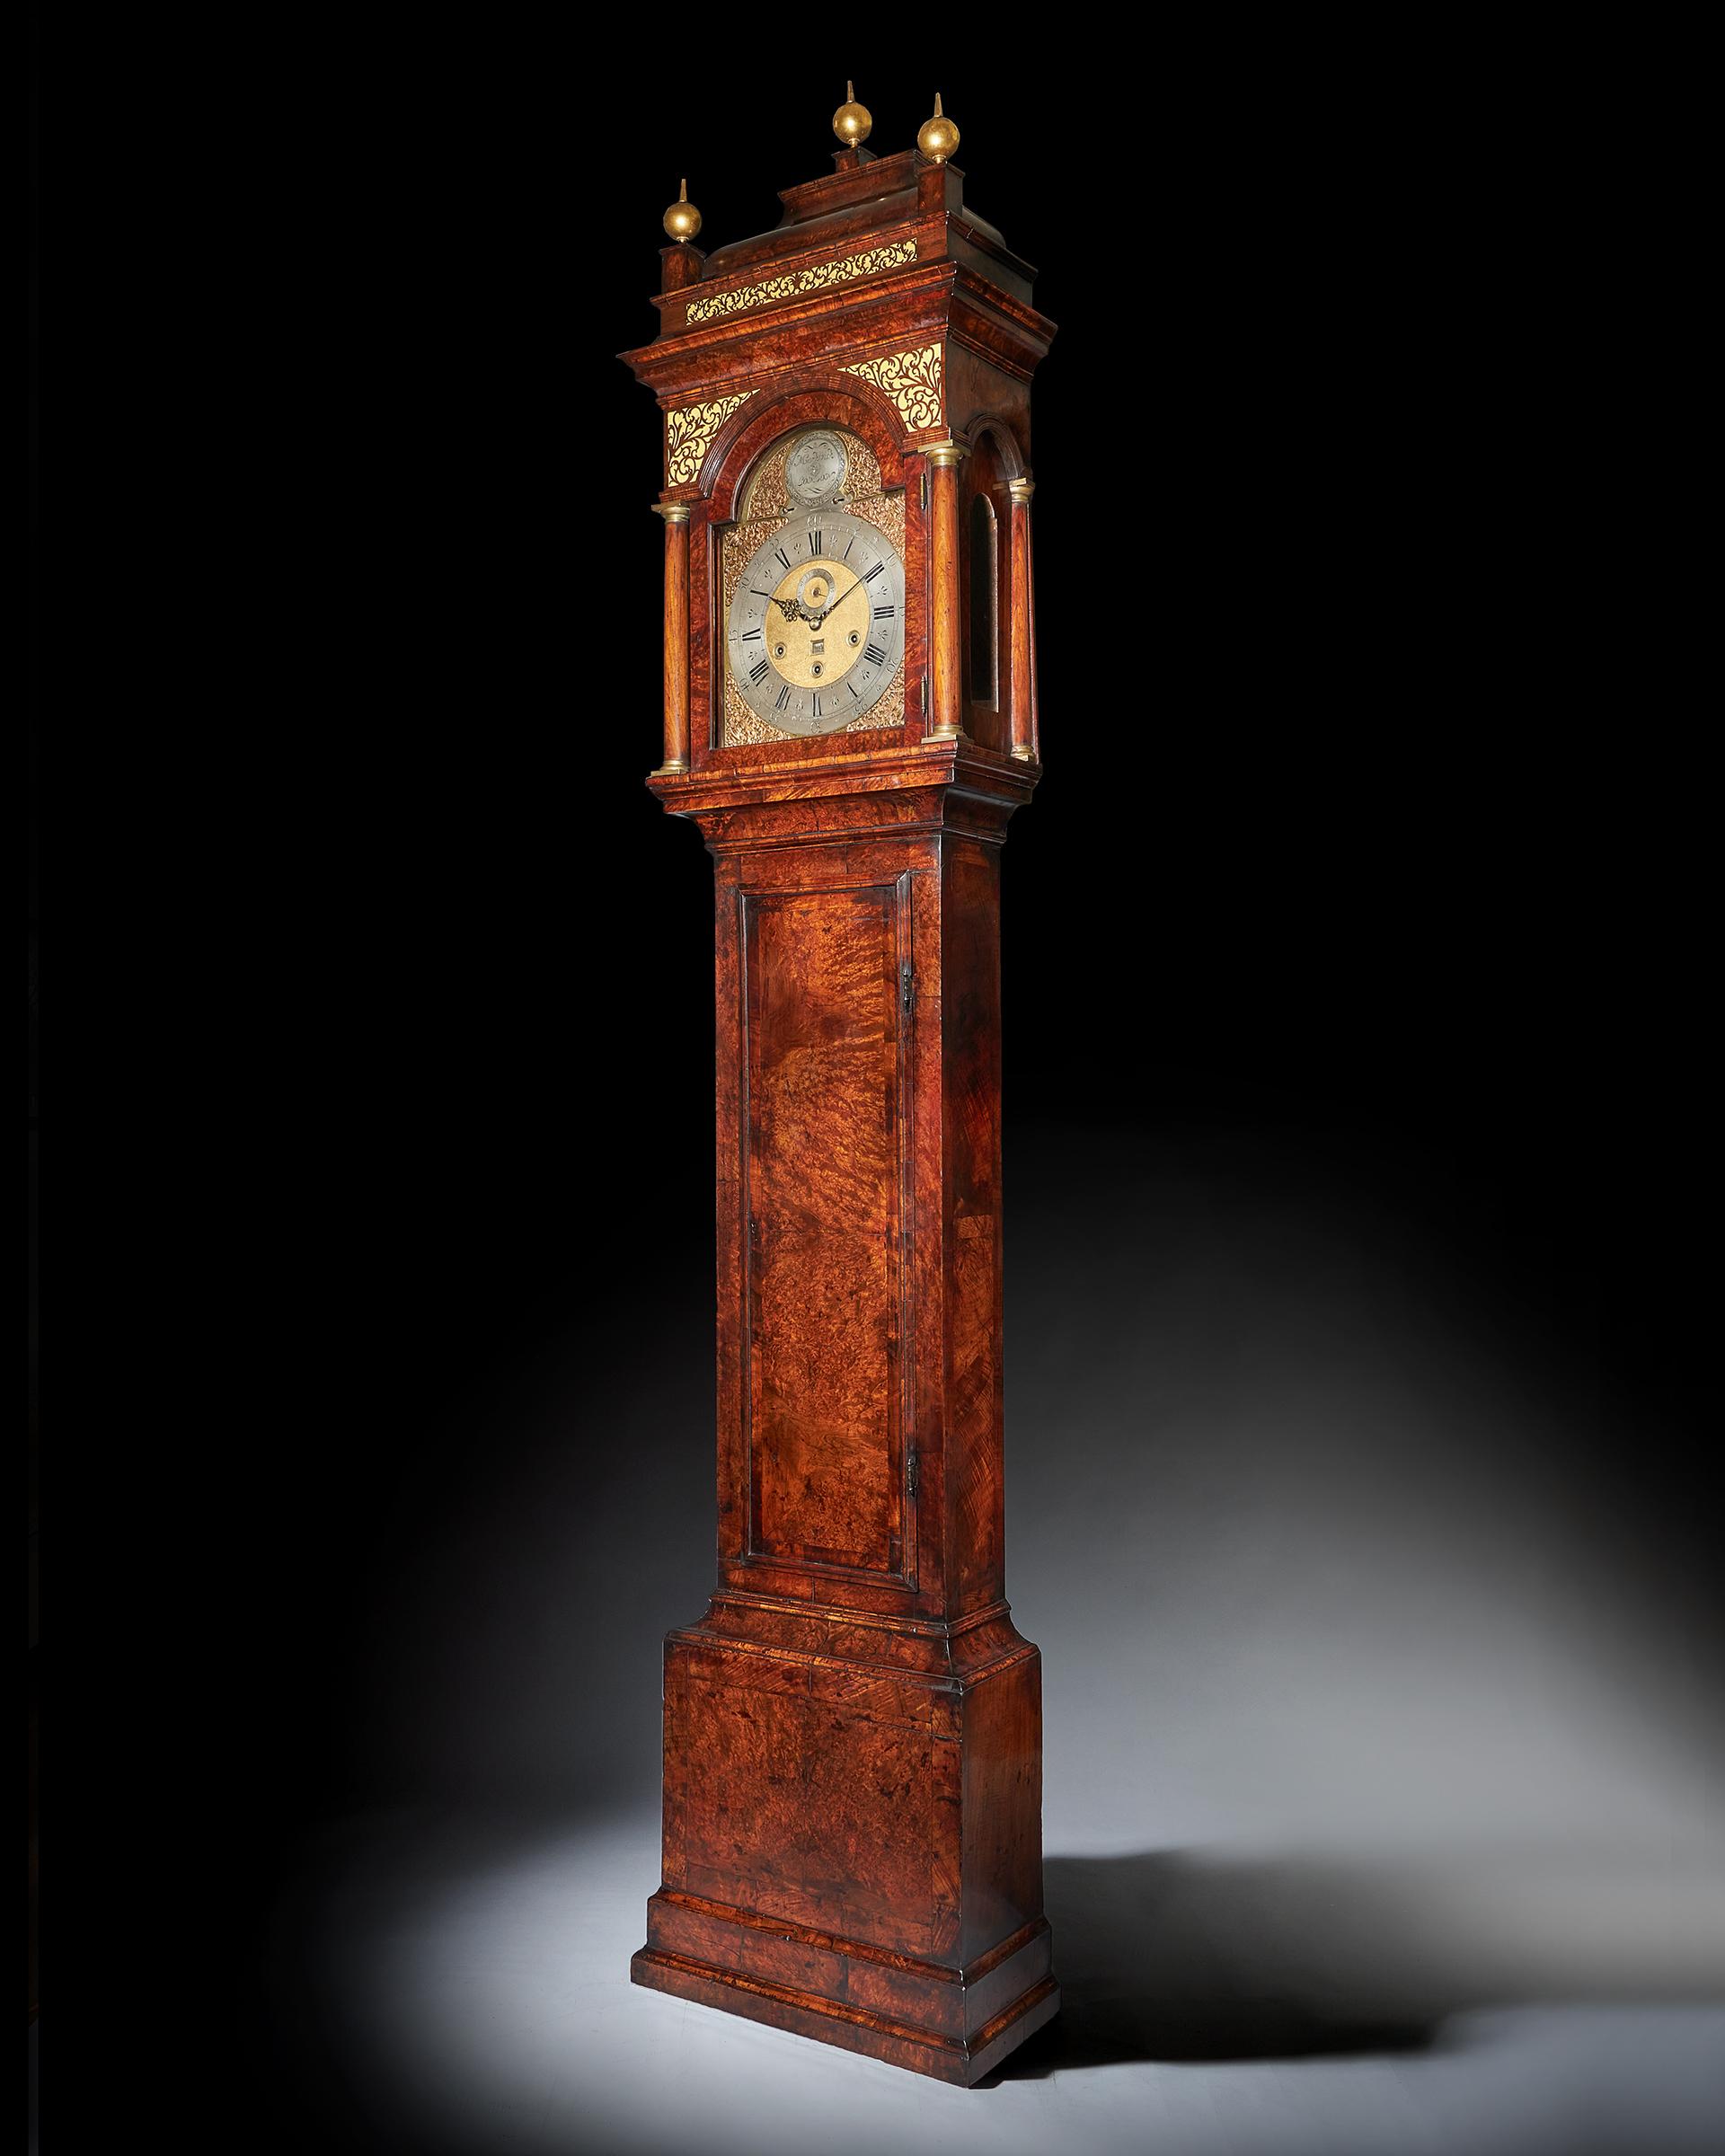 This is, without doubt, the largest and most impressive English longcase/grandfather clock we have ever encountered, standing at three meters twenty (10.5ft/321cm) and it is quite possibly the largest from the entire 18th century. The golden age.